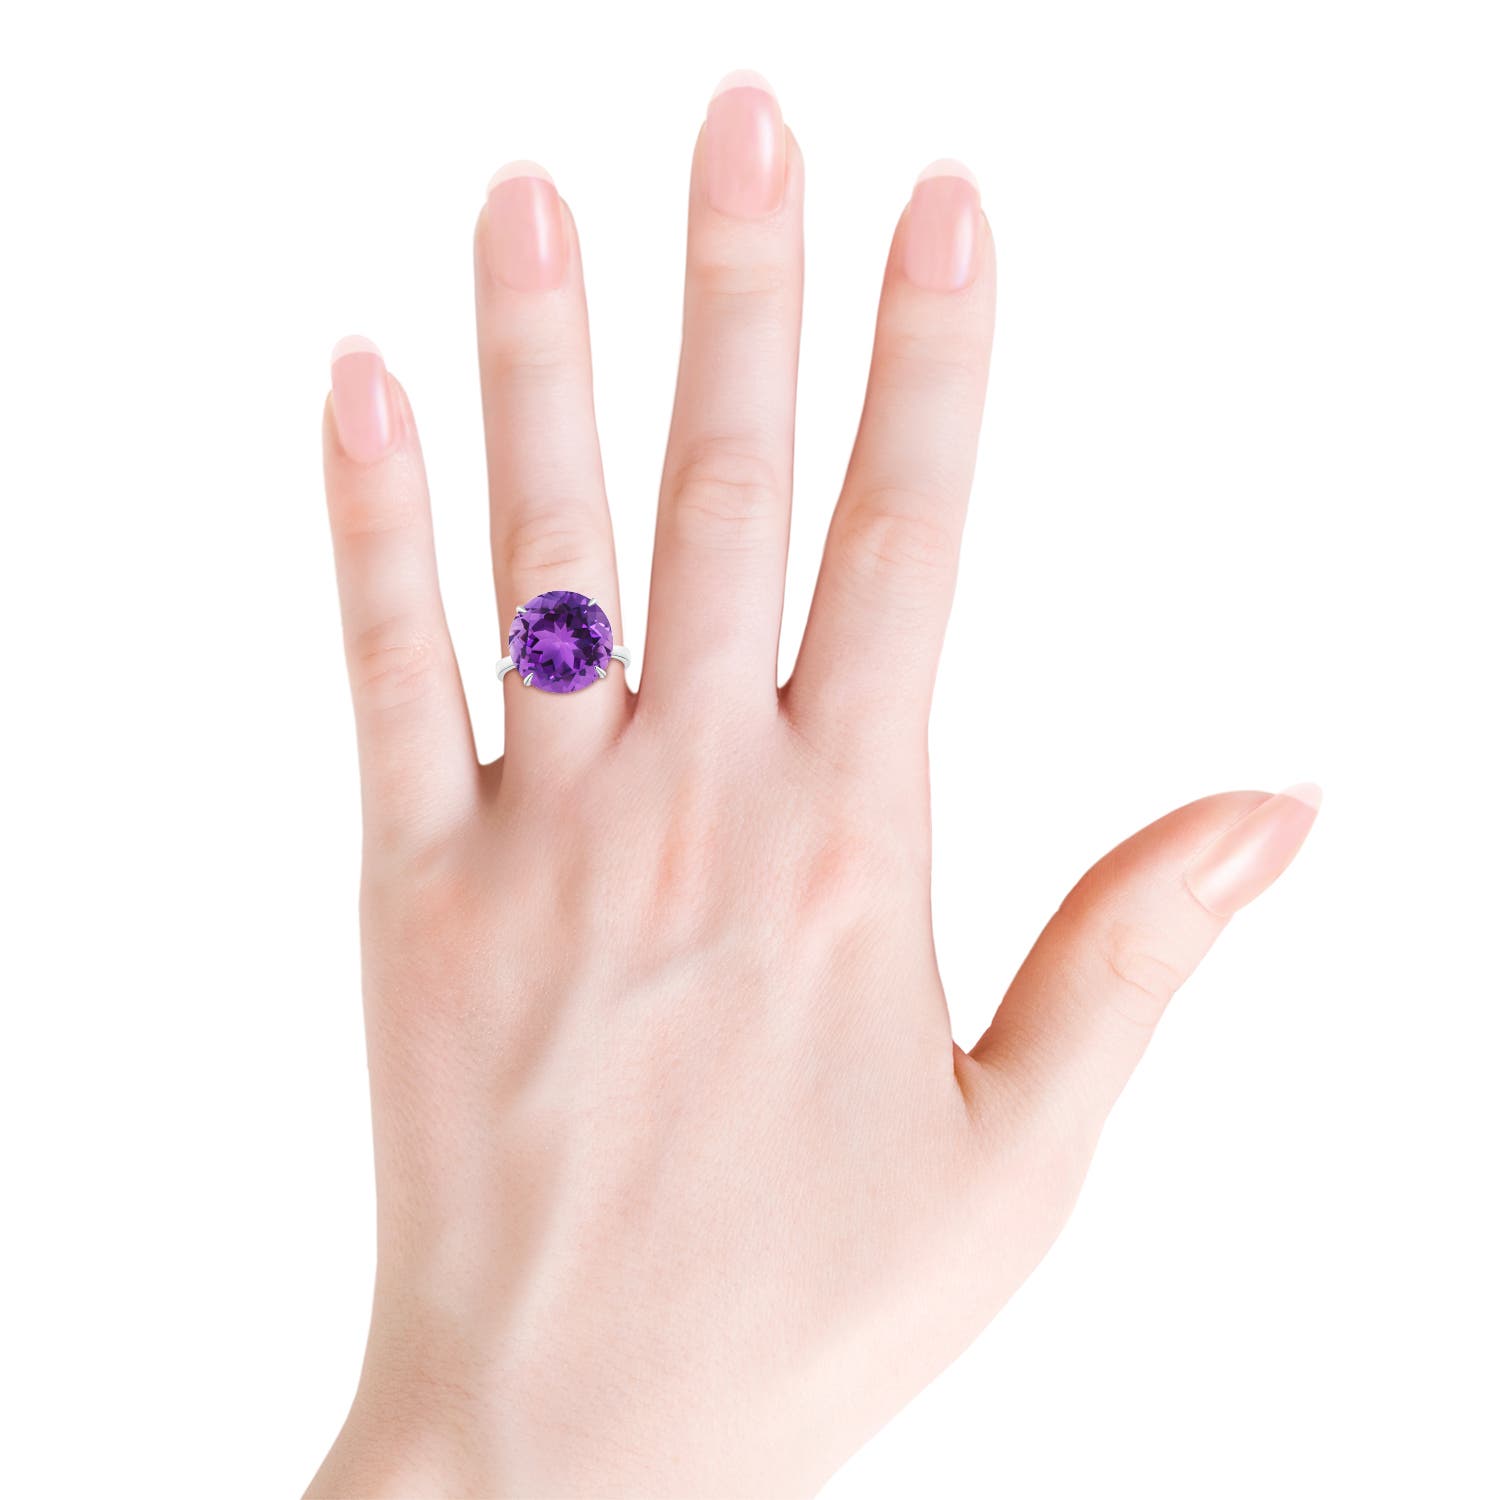 AAA- Amethyst / 8.5 CT / 14 KT White Gold